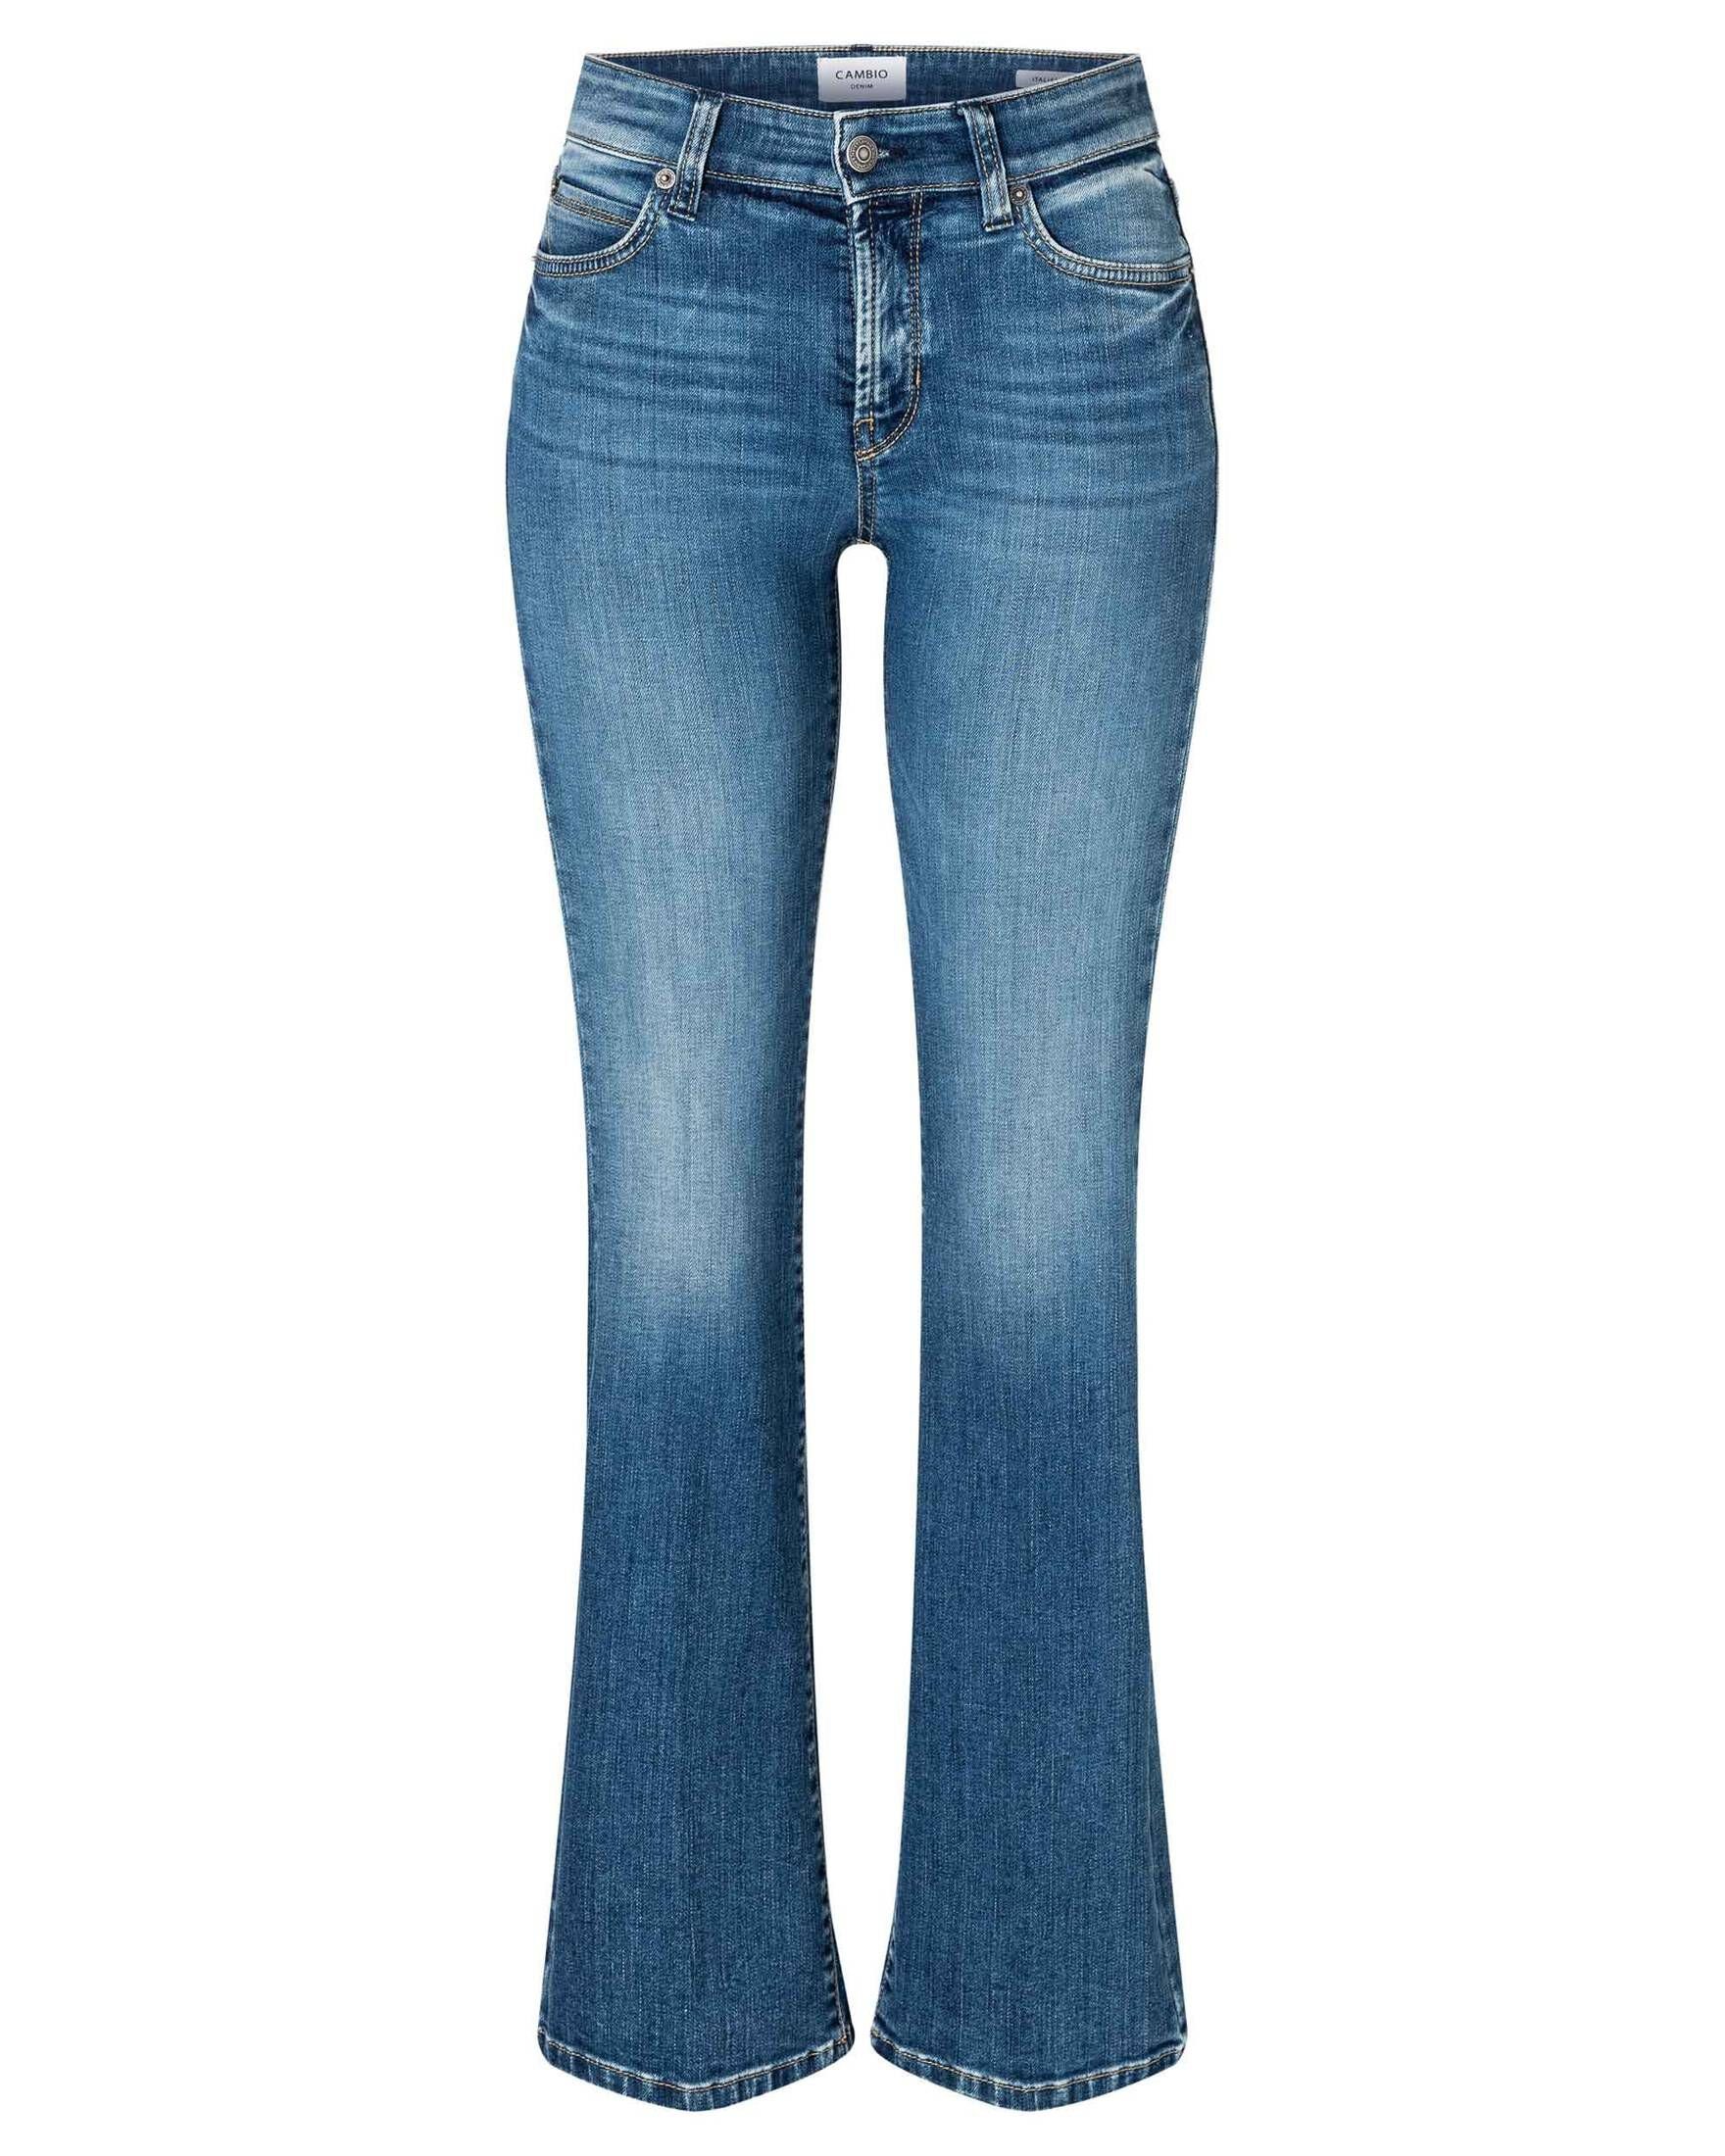 Cambio 5-Pocket-Jeans Damen (1-tlg) Bootcutjeans